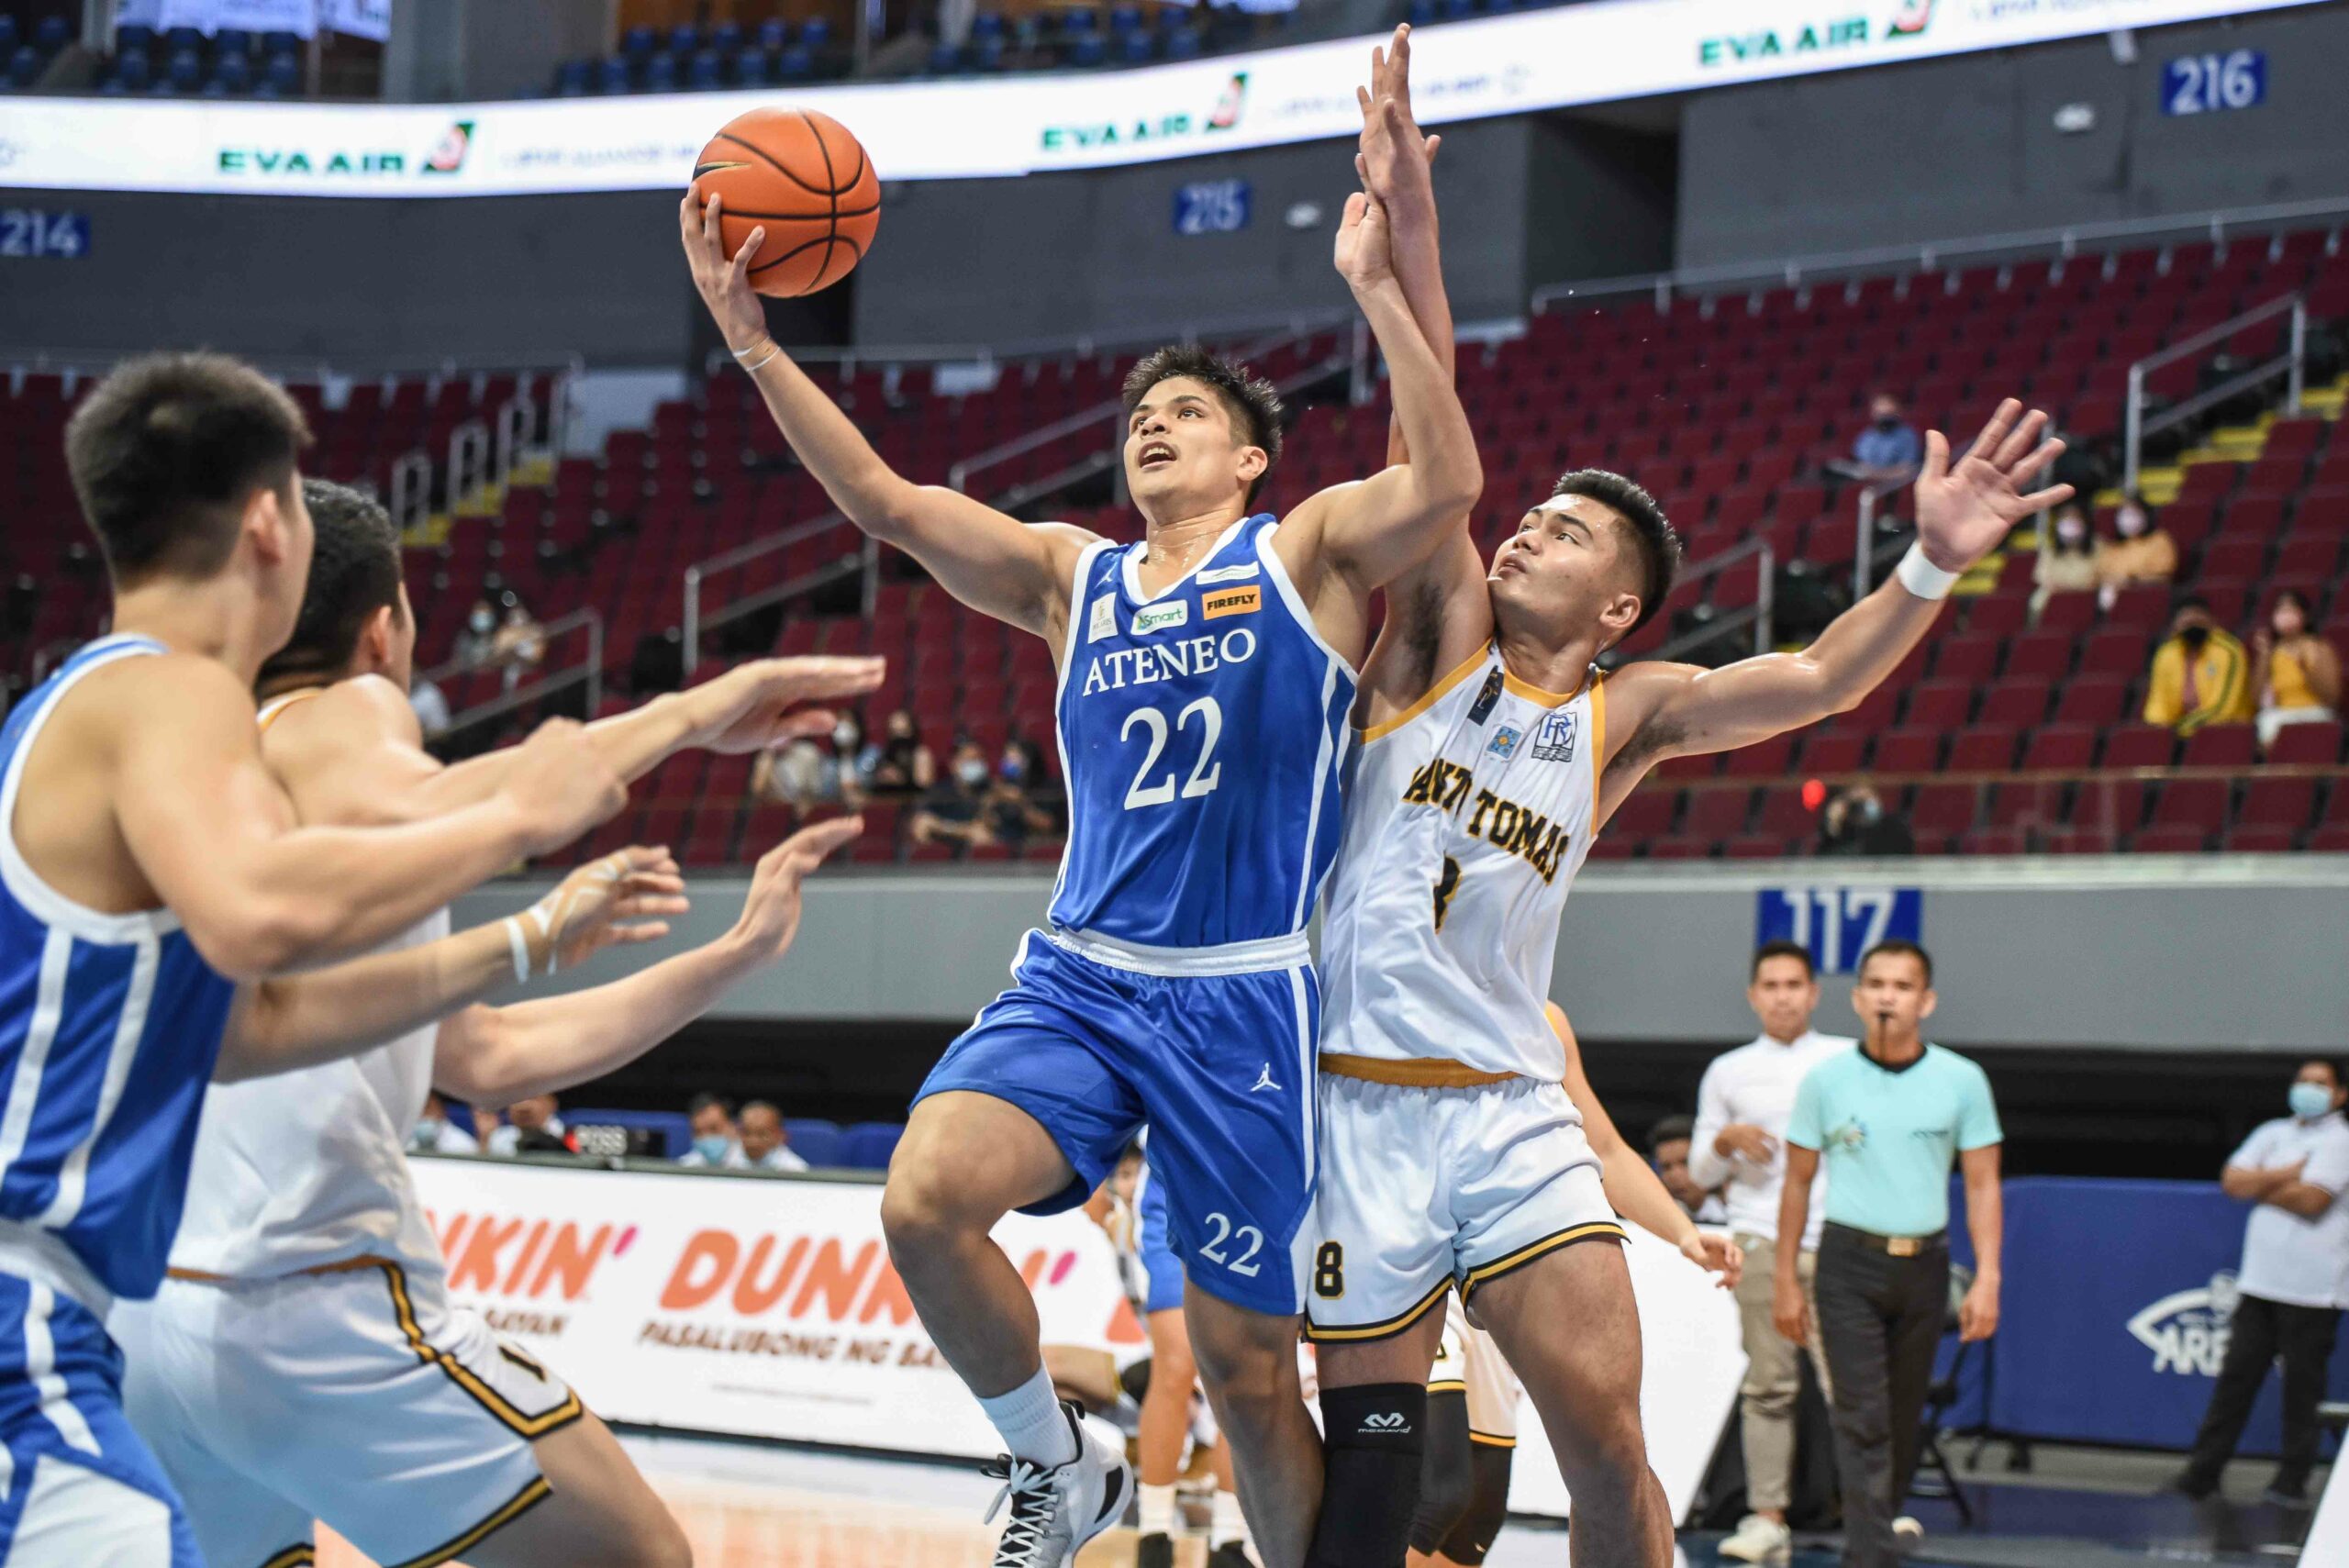 UAAP-84-Mens-Basketball-UST-vs-Ateneo-Rafael-Verano-scaled Baldwin hopes UST drubbing is a 'sign of things to come' for Ateneo ADMU Basketball News UAAP  - philippine sports news